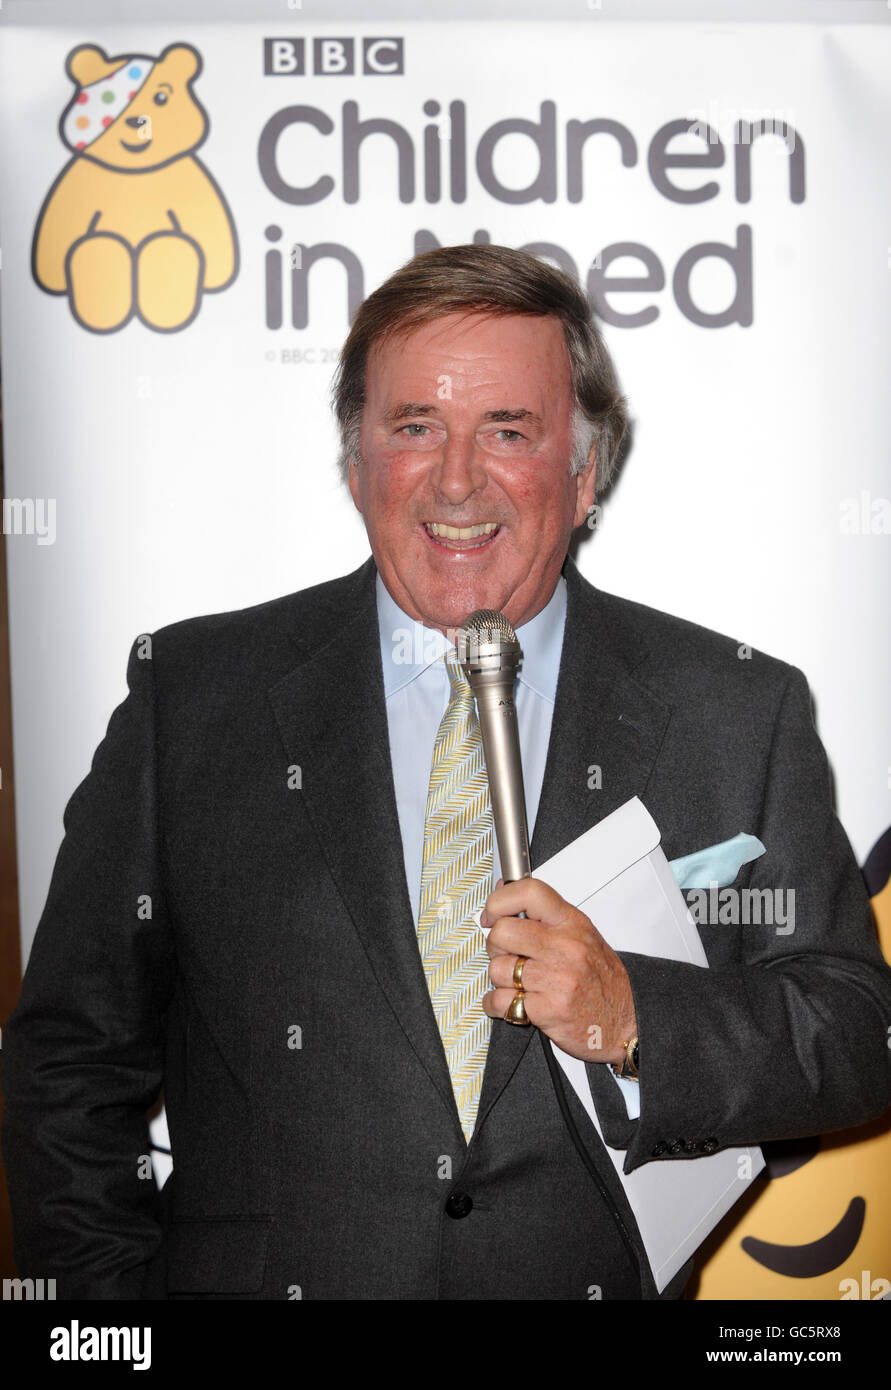 Sir Terry Wogan makes a speech during the launch of Children in Need's charity album, Bandaged Together, at the BBC Club on Great Portland Street, central London. Stock Photo